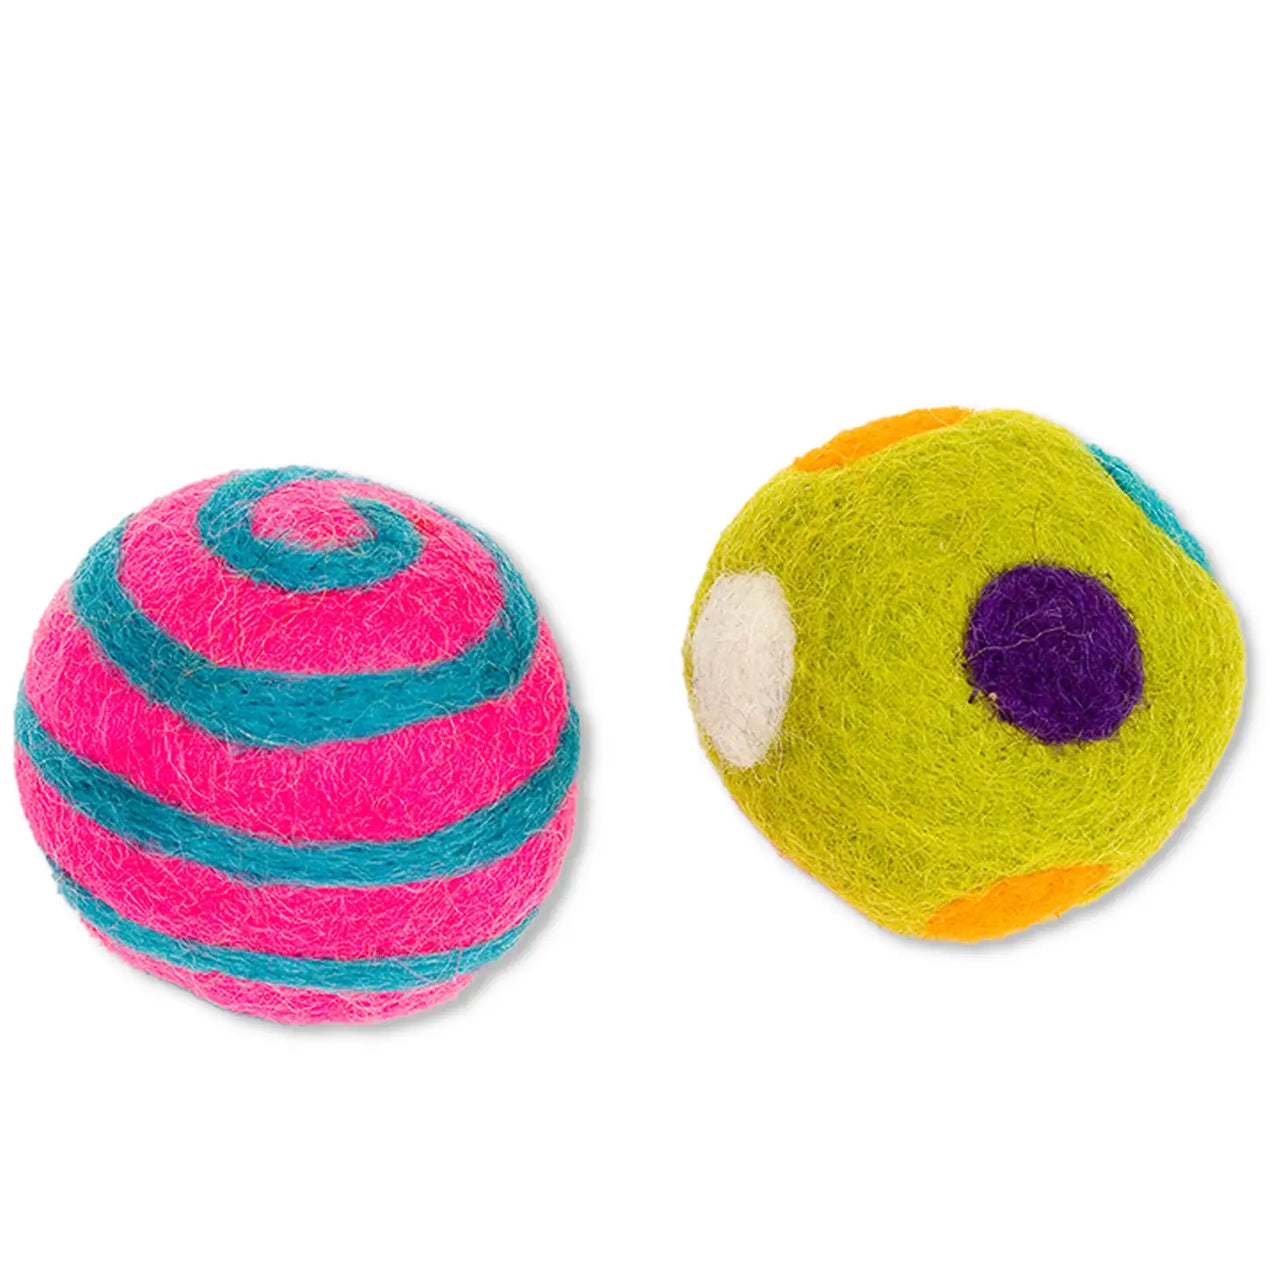 Wool Cat Toy - Pack